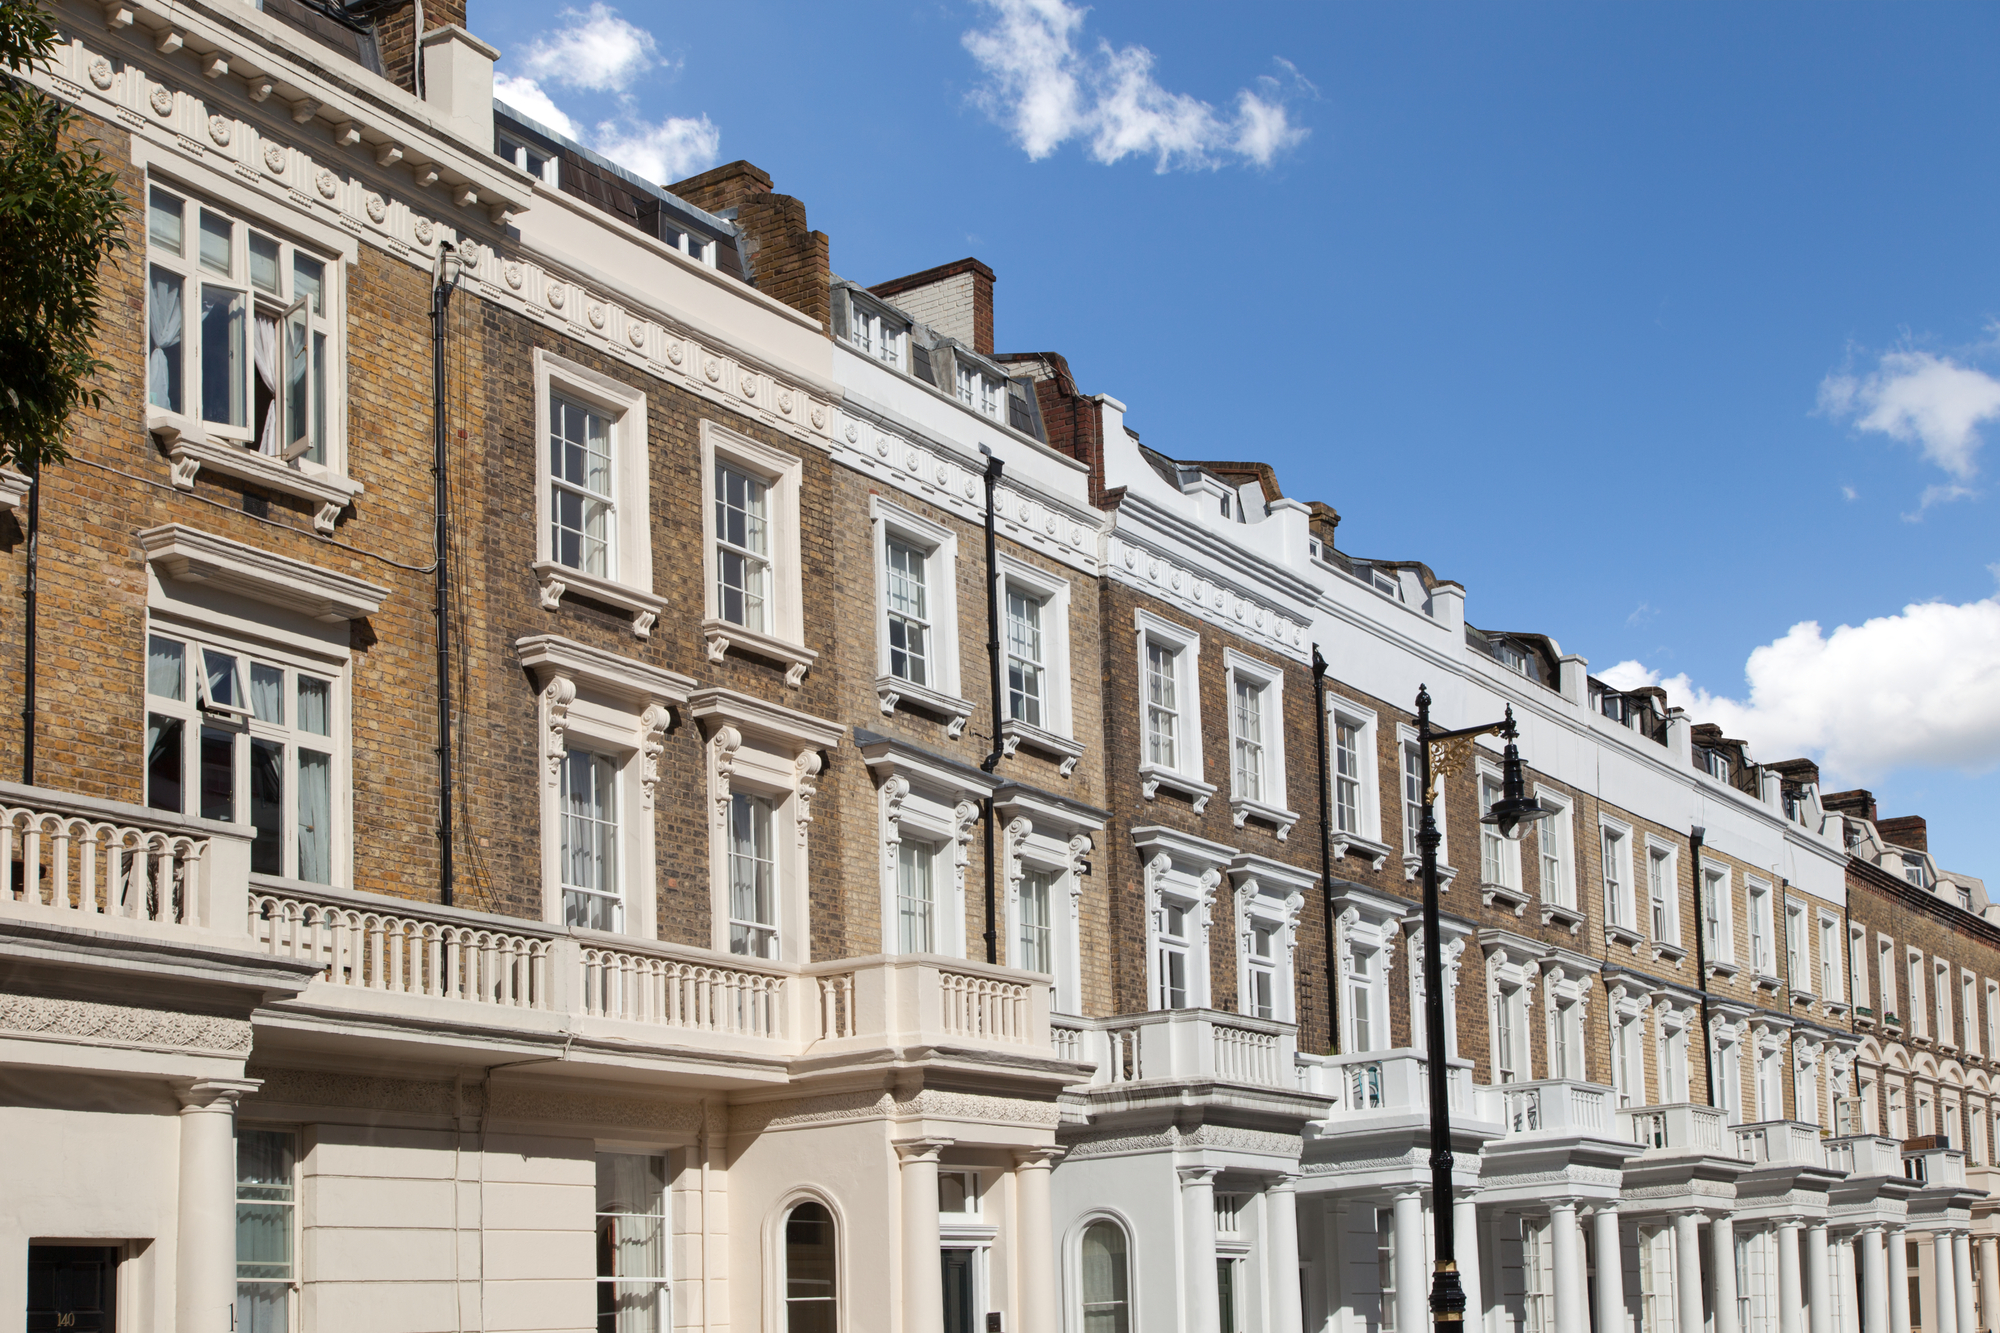 Row of typical houses in London